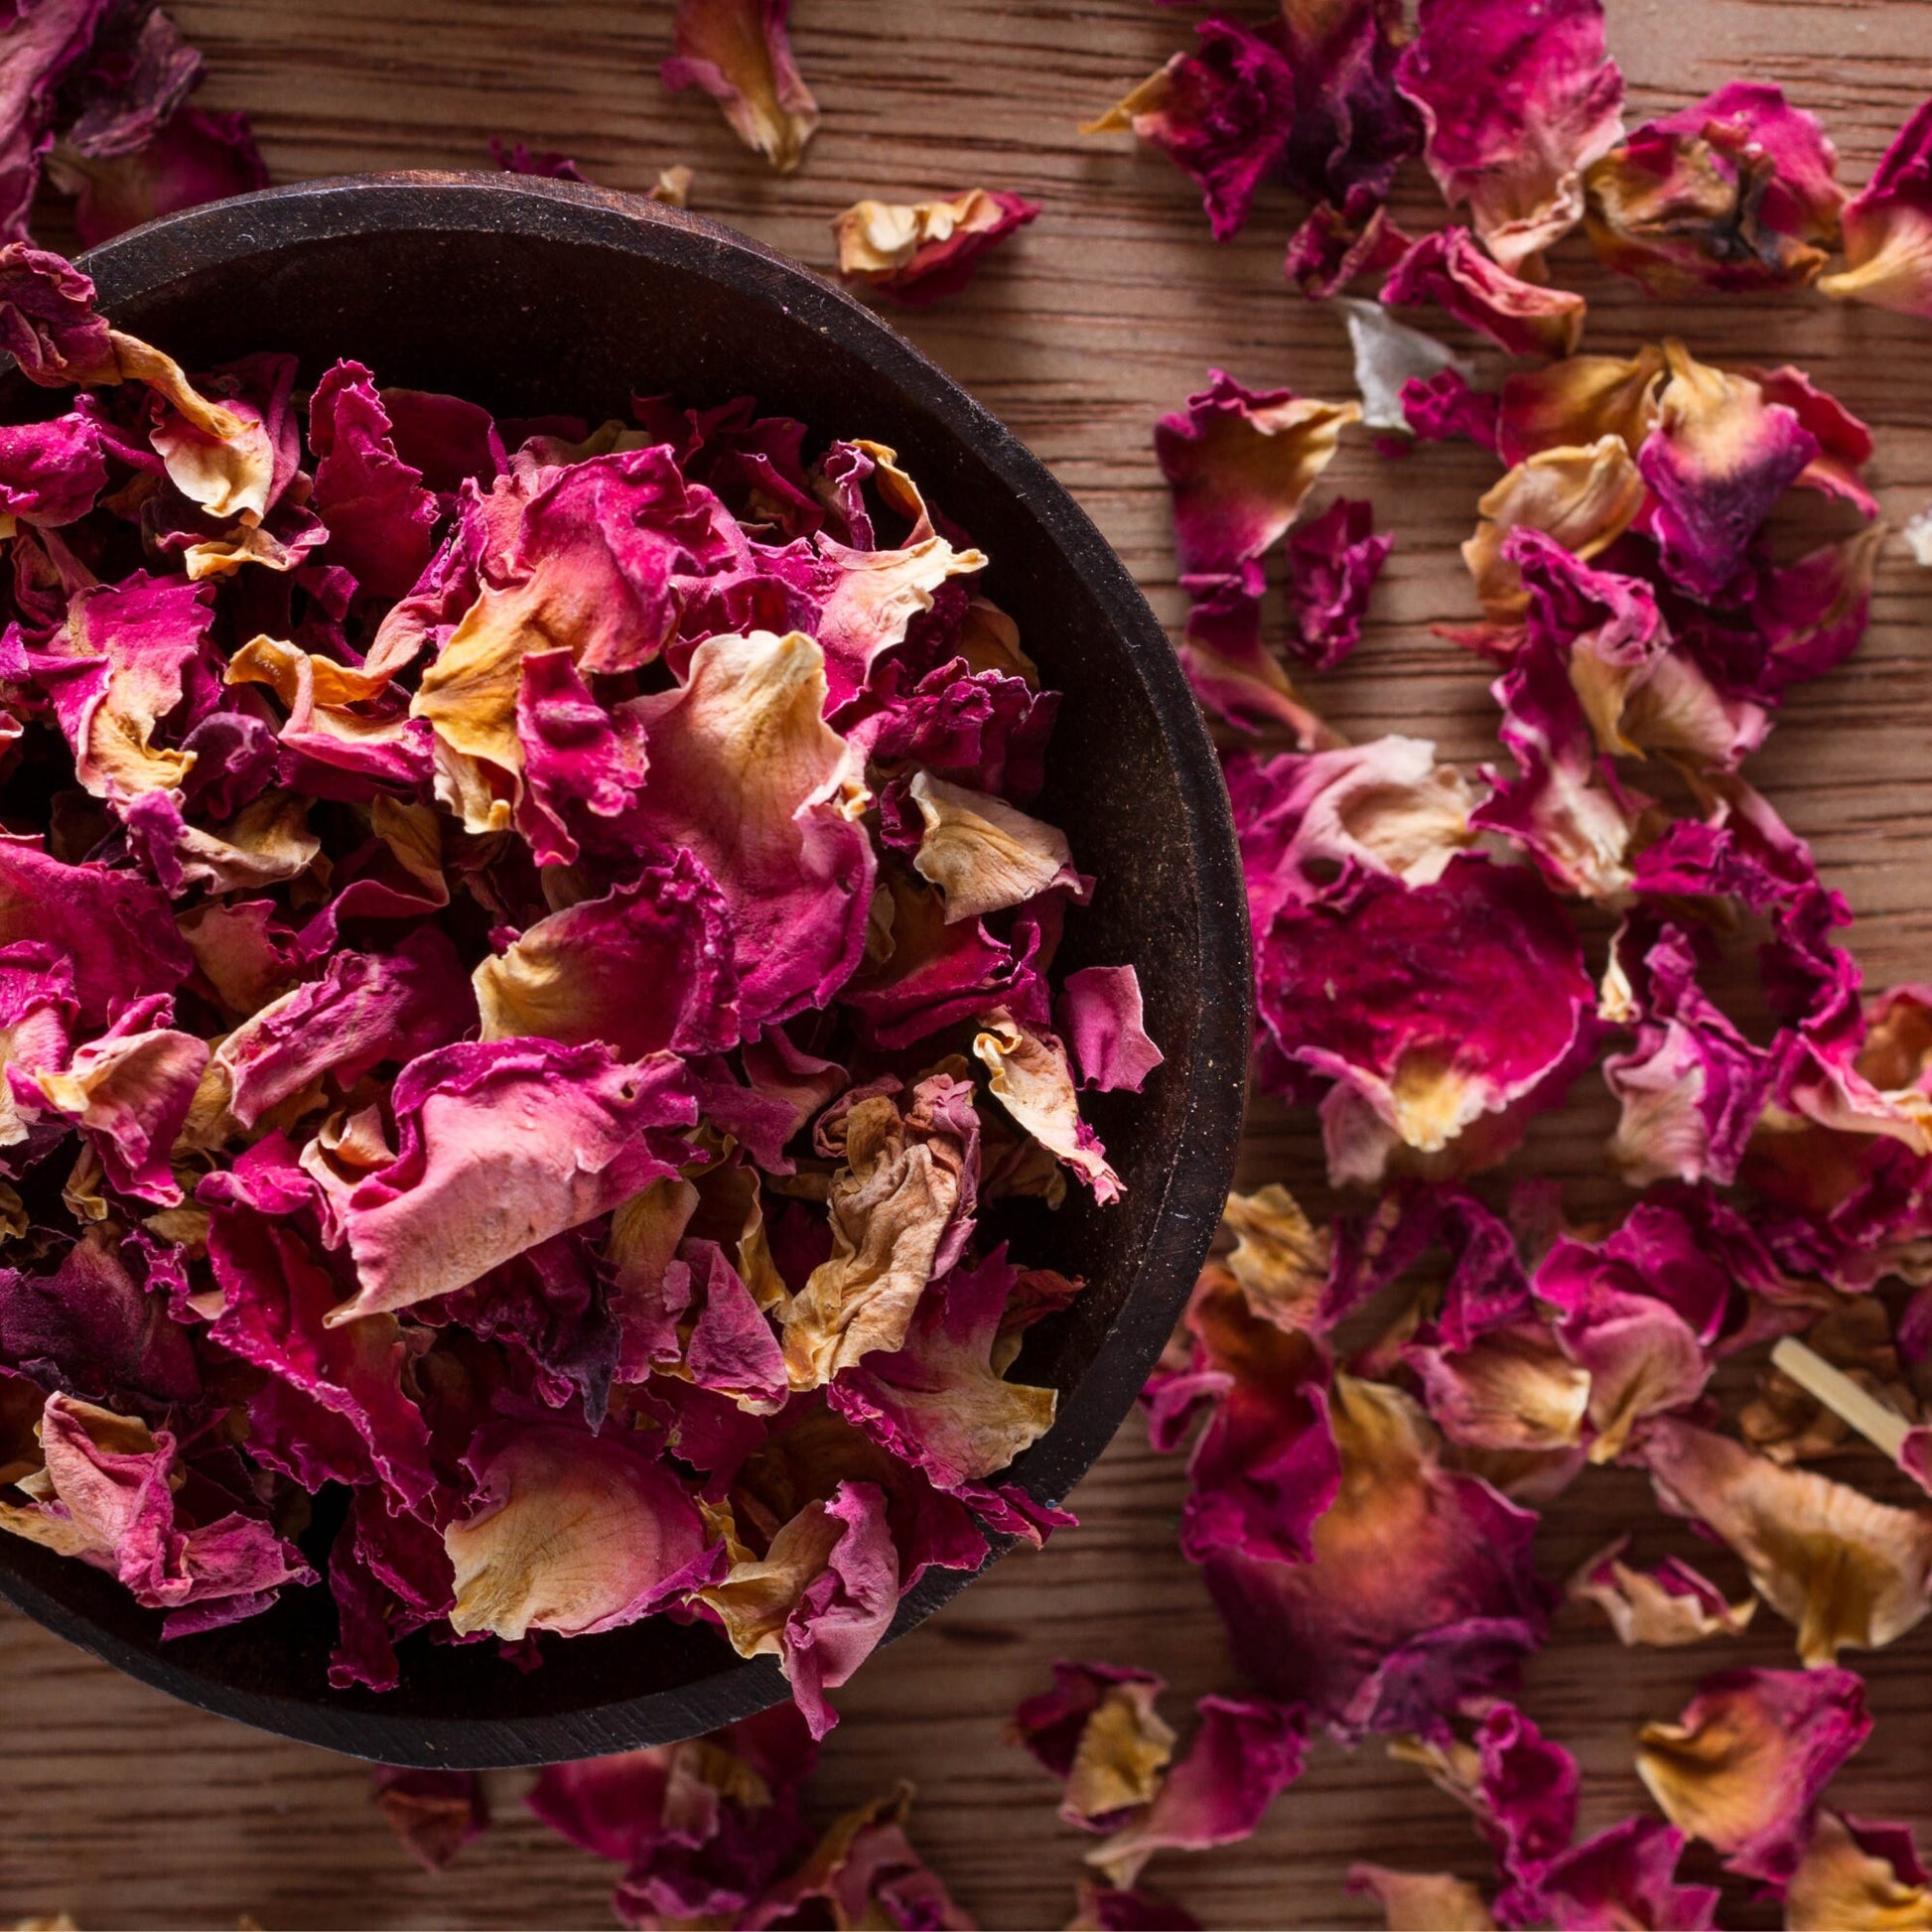 Pure Red Rose Petals - Edible & Natural - For Tea, Italy